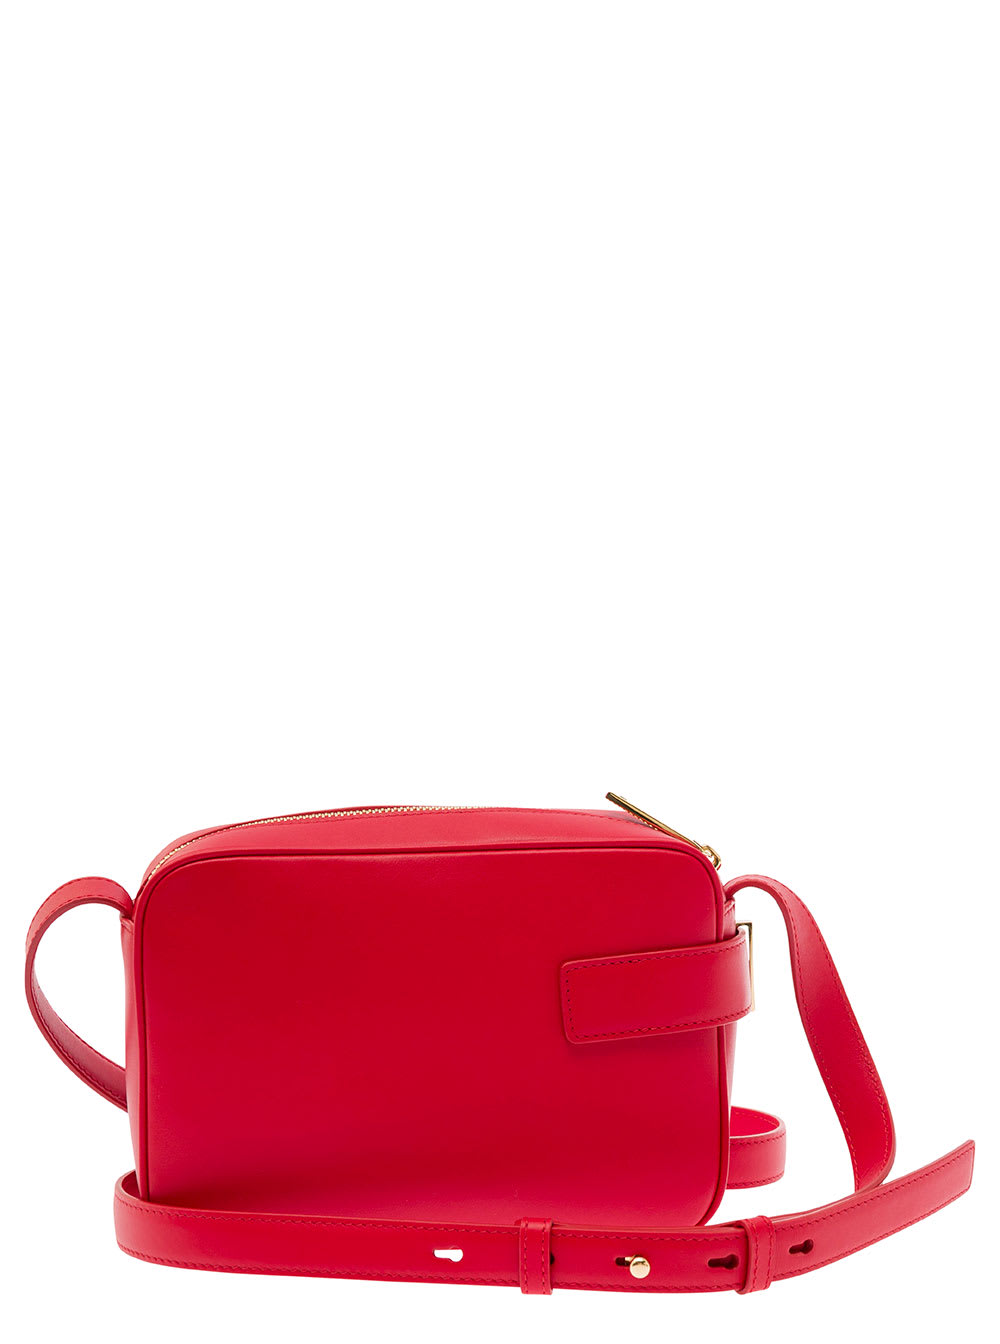 Shop Ferragamo Camera Case S Red Crossbody Bag With Gancini Buckle In Leather Woman